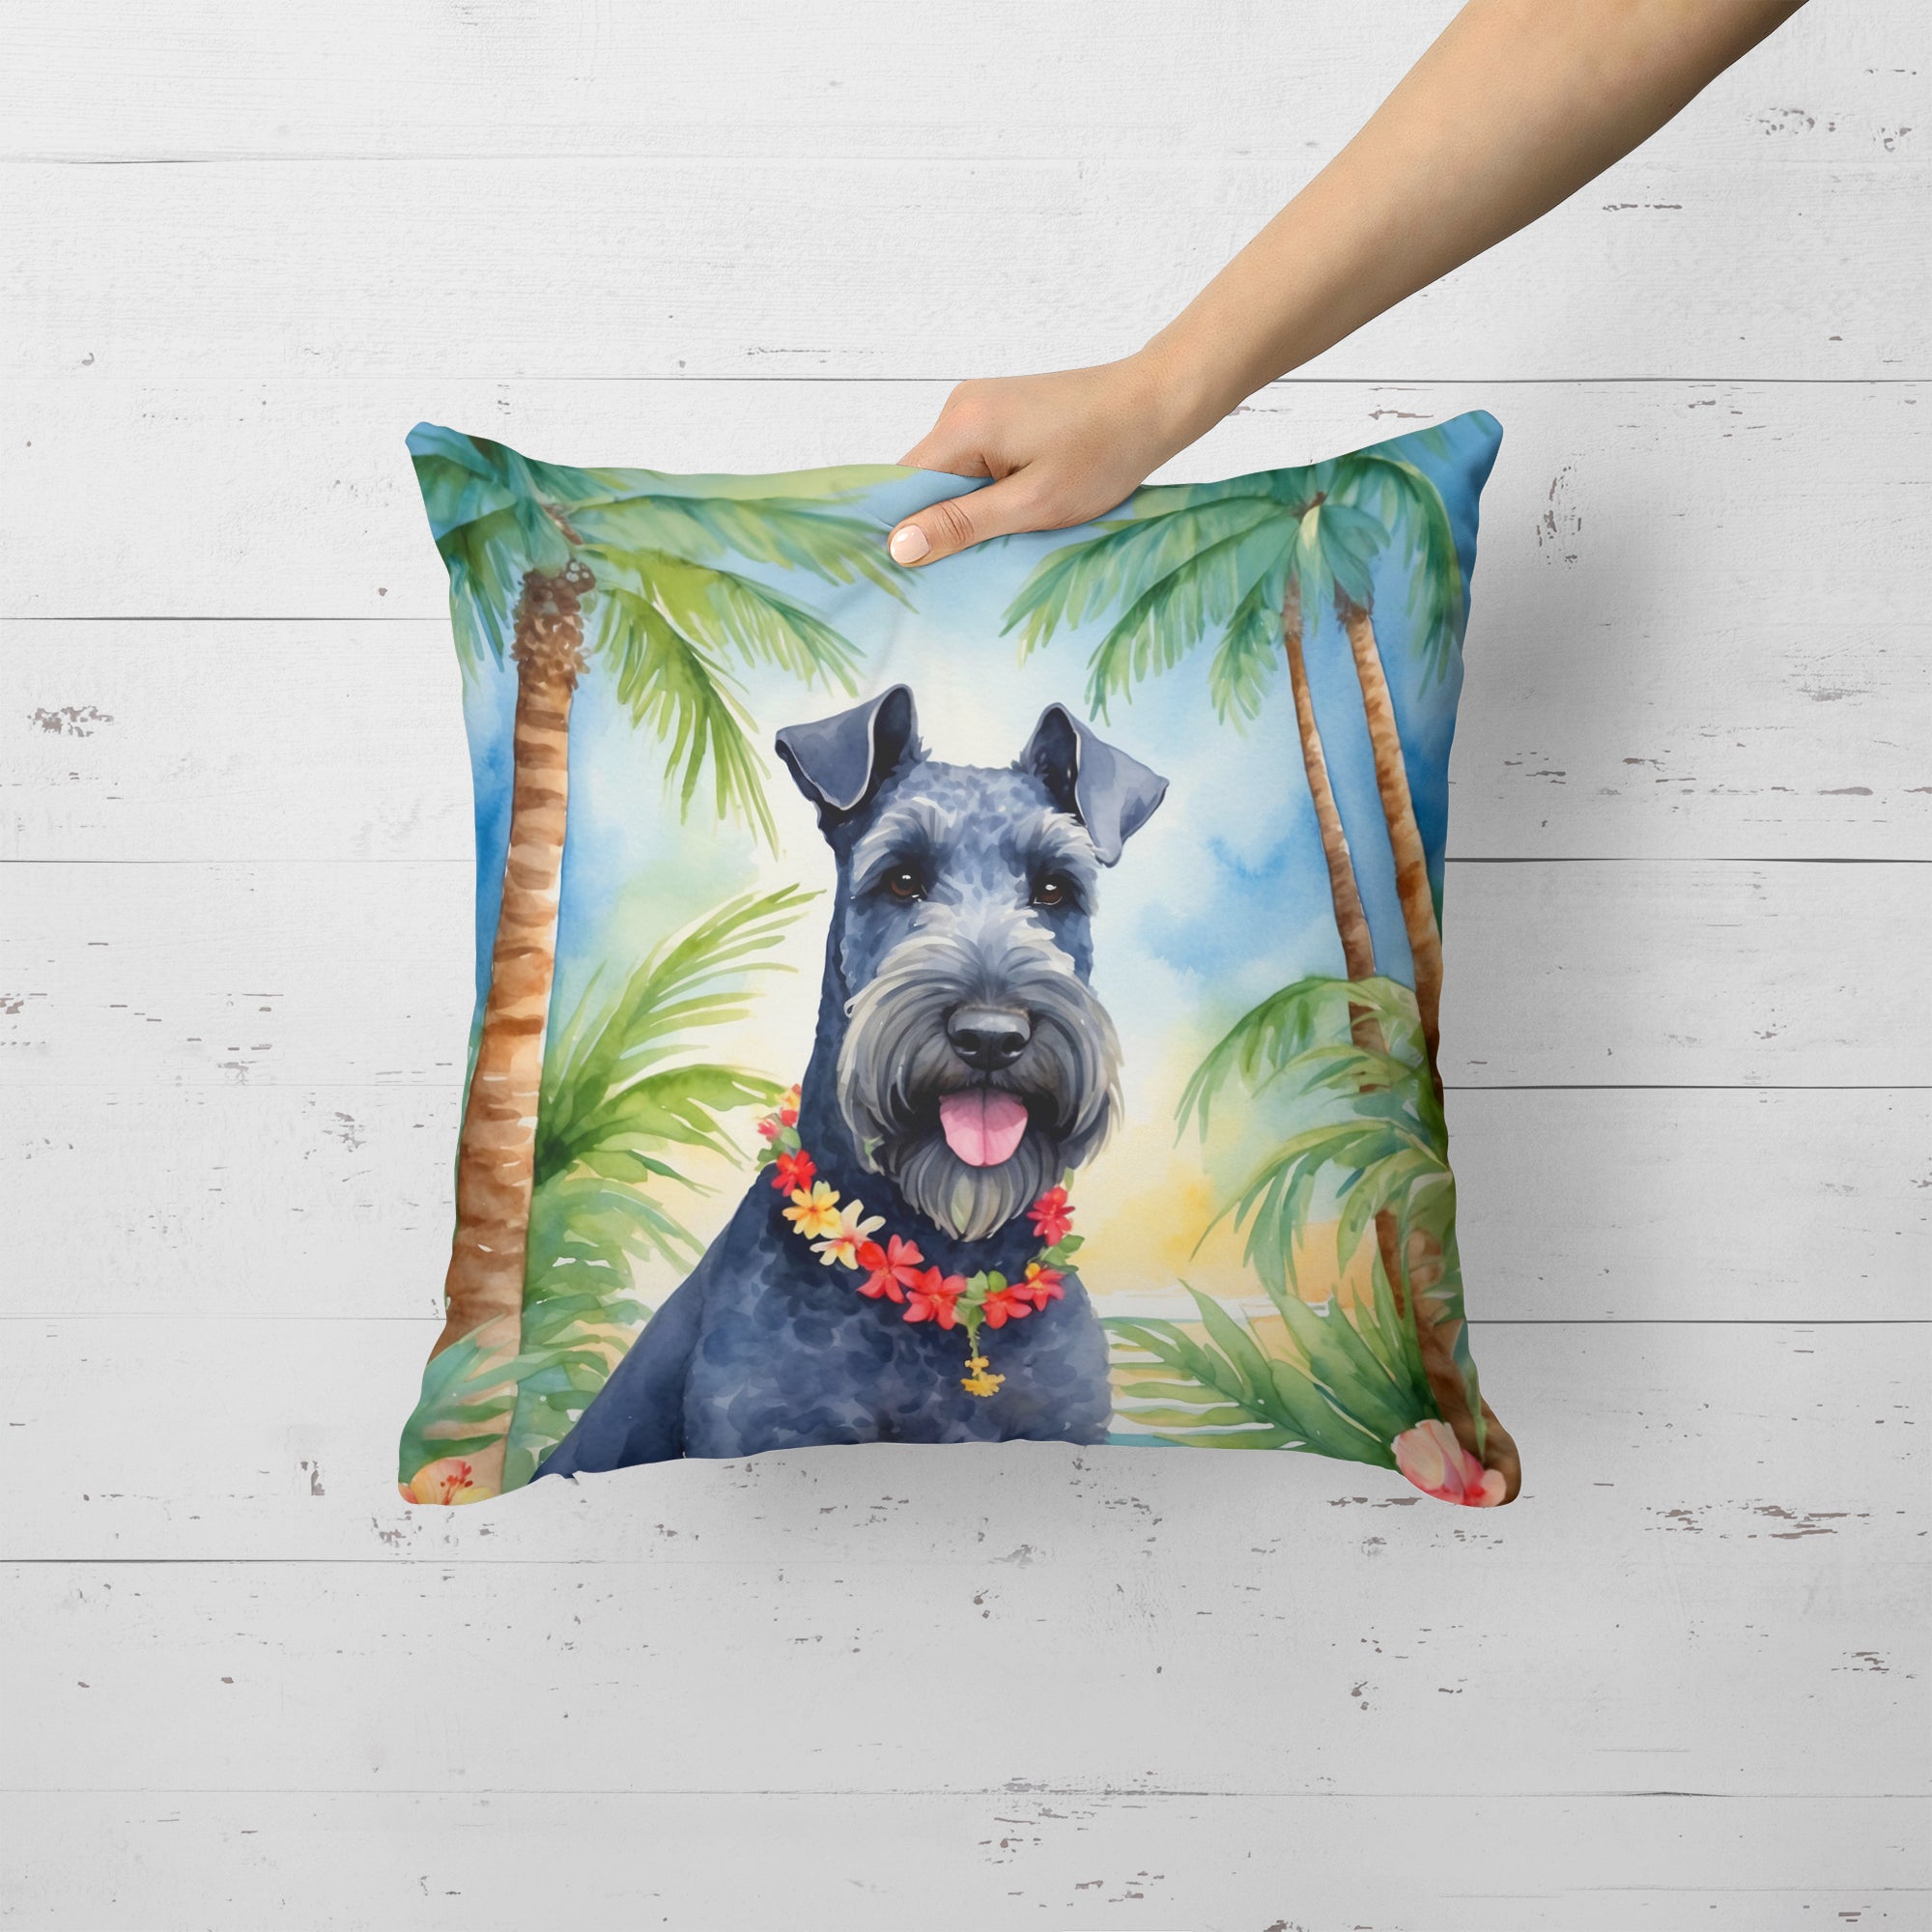 Buy this Kerry Blue Terrier Luau Throw Pillow